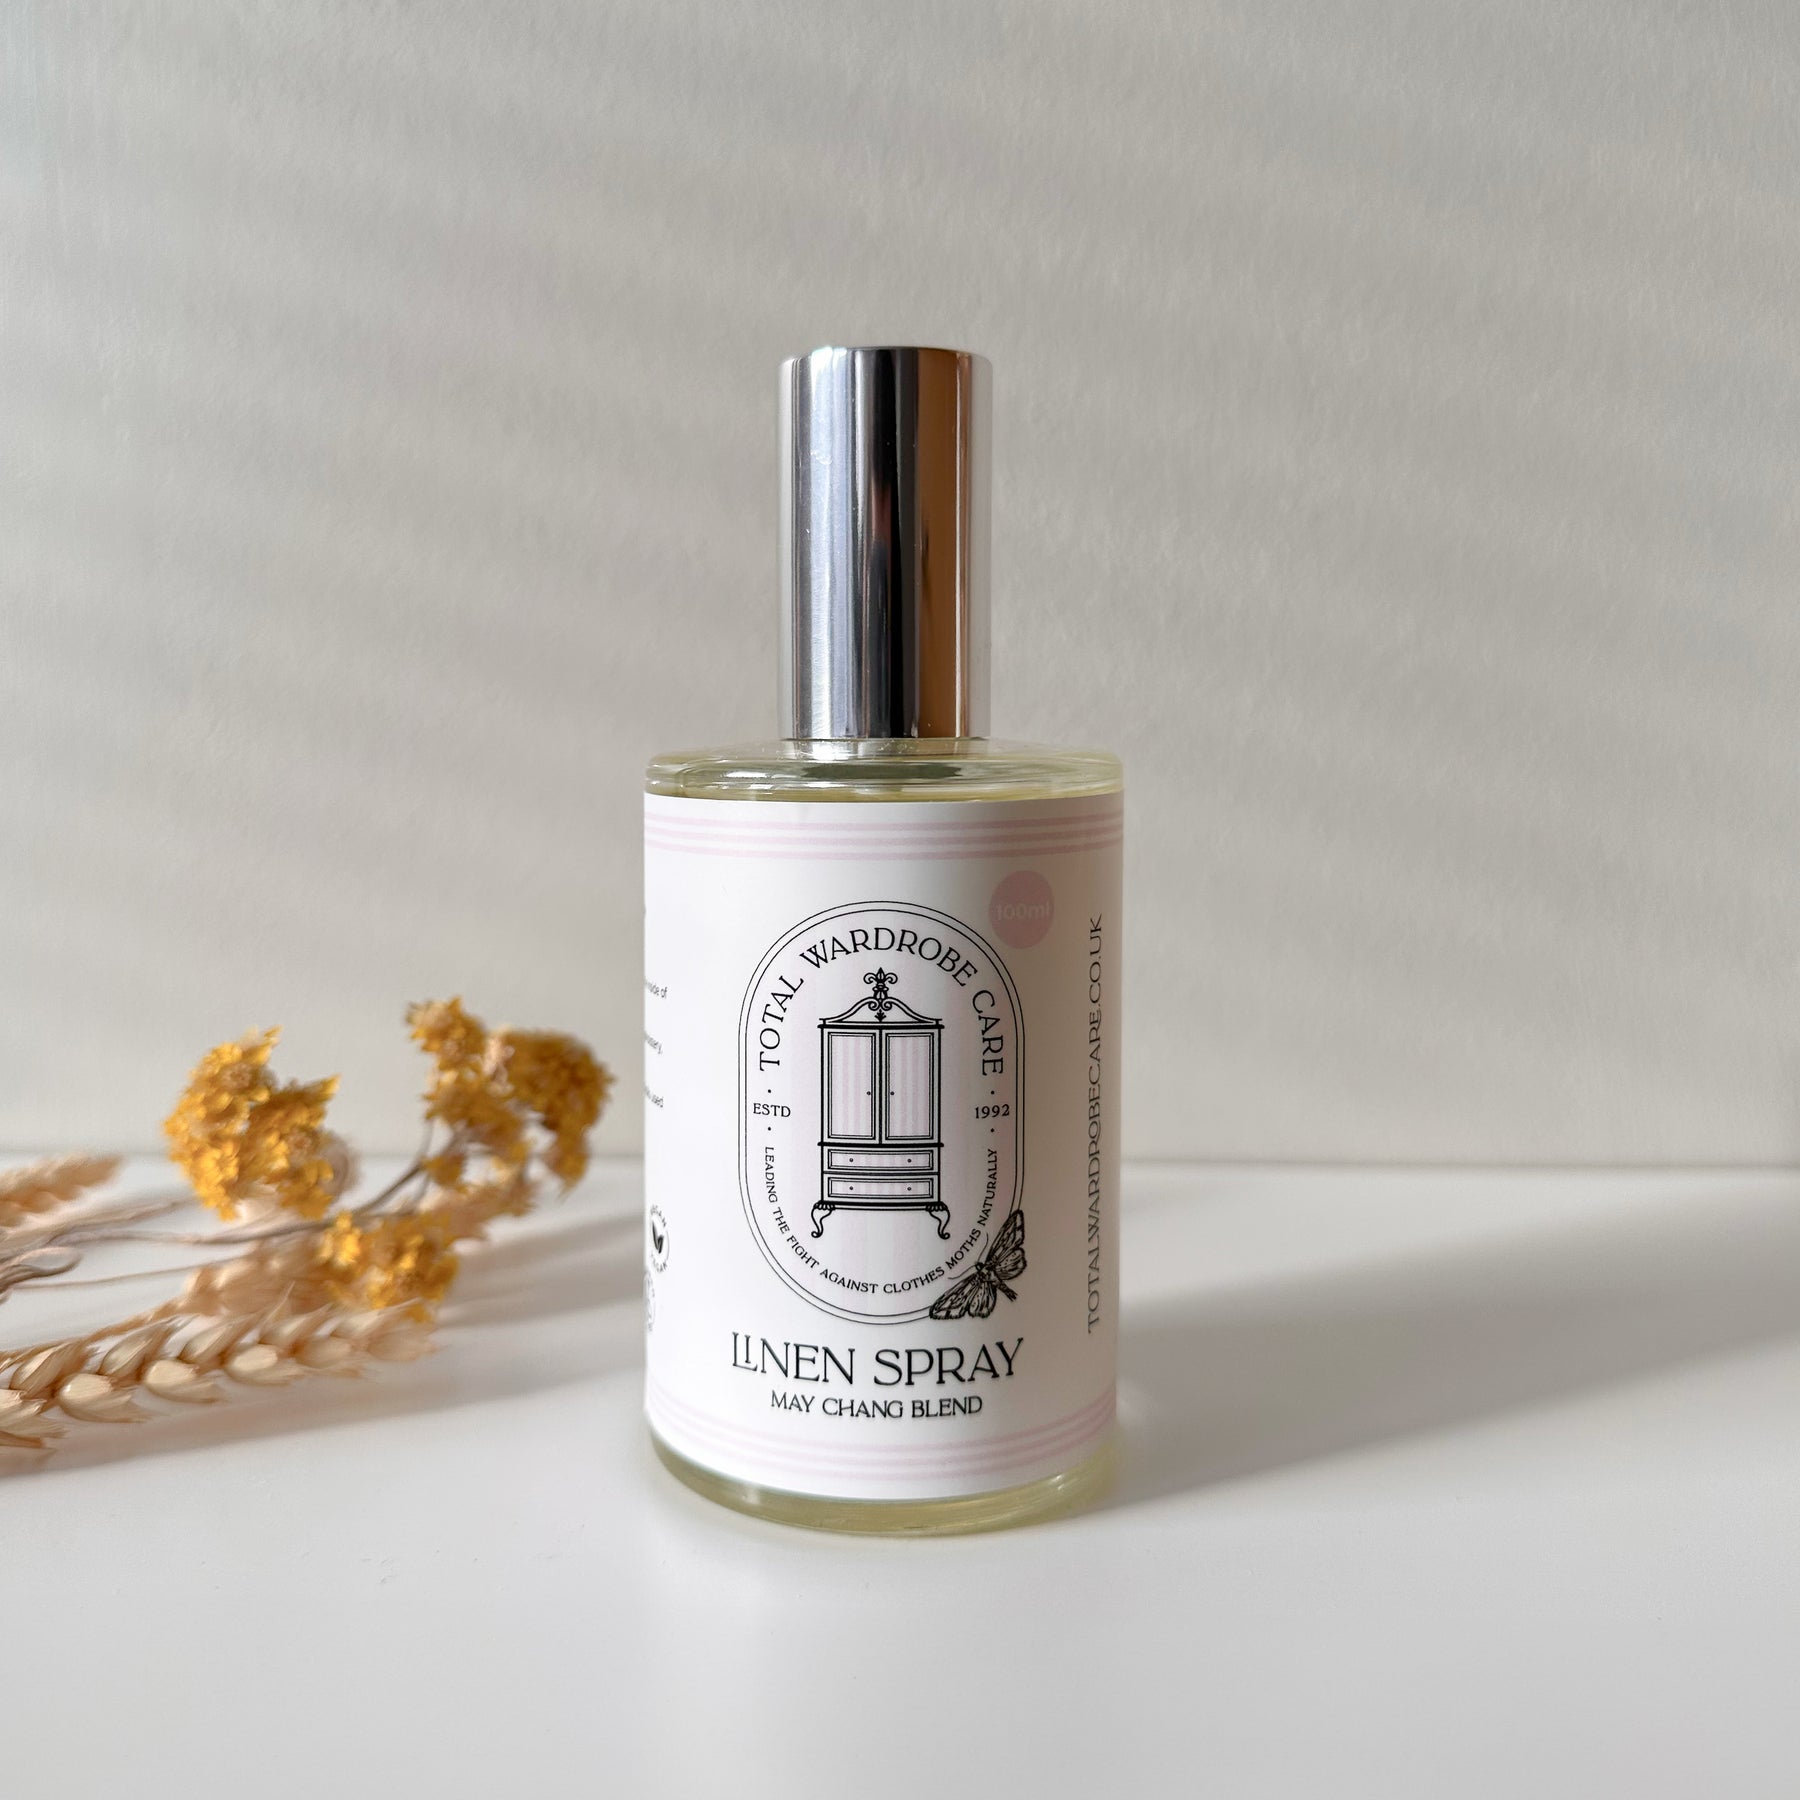 Dainty bottle of May Chang blend linen spray on white surface